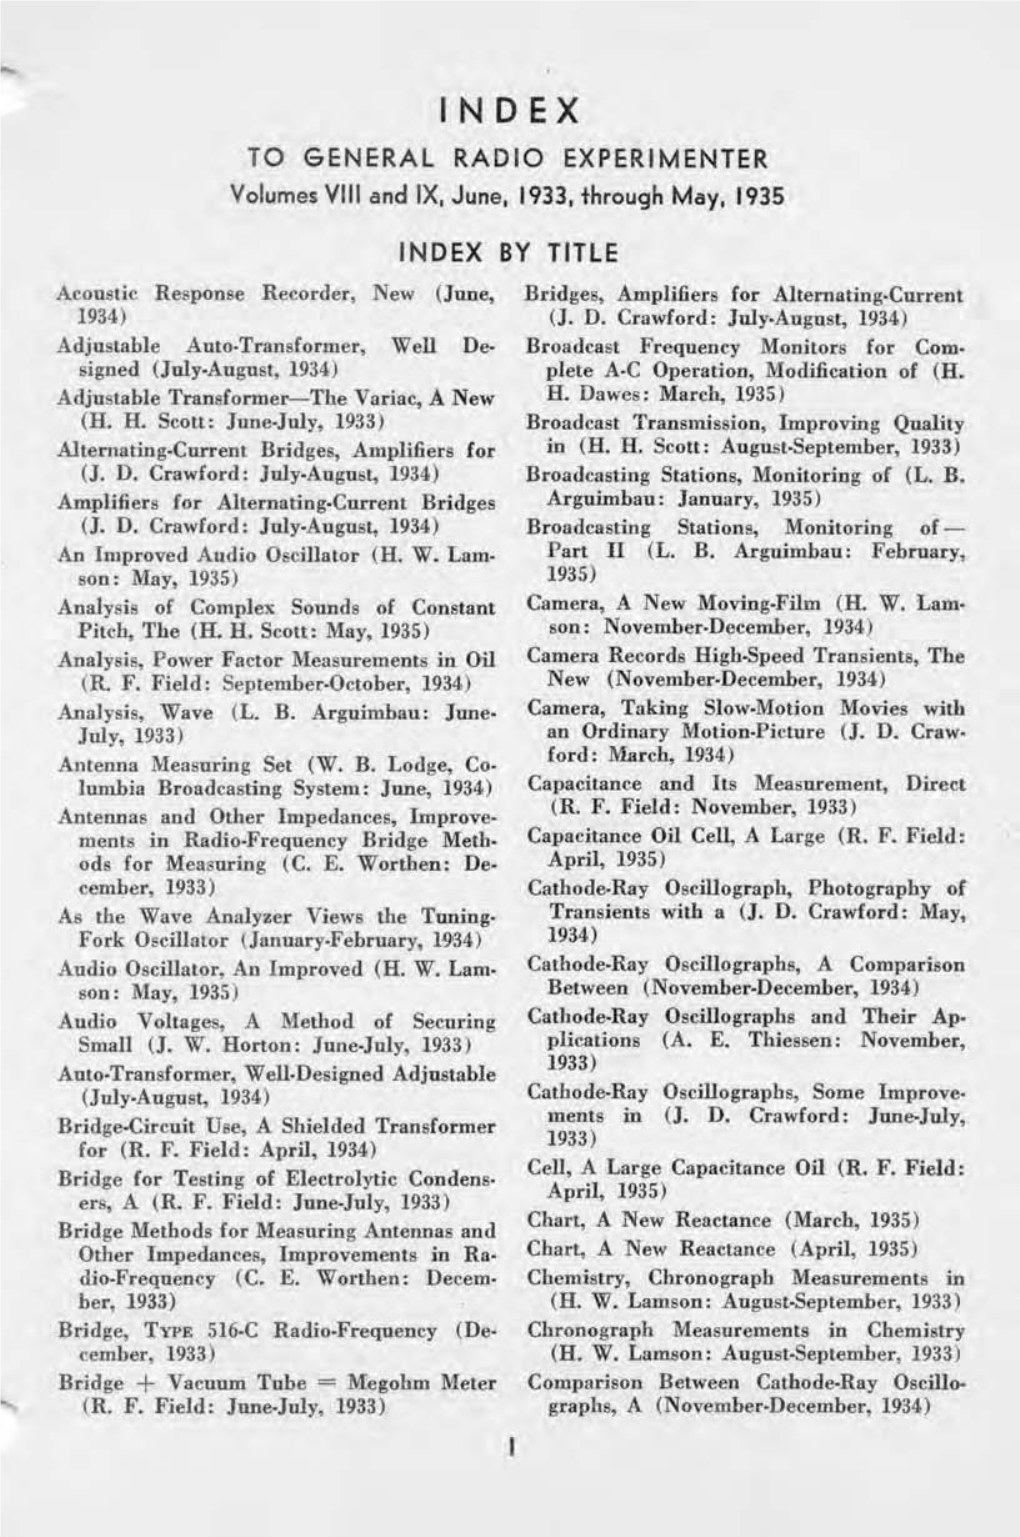 IN 0 EX to GENERAL RADIO EXPERIMENTER Volumes VIII and IX, June, 1933, Through May